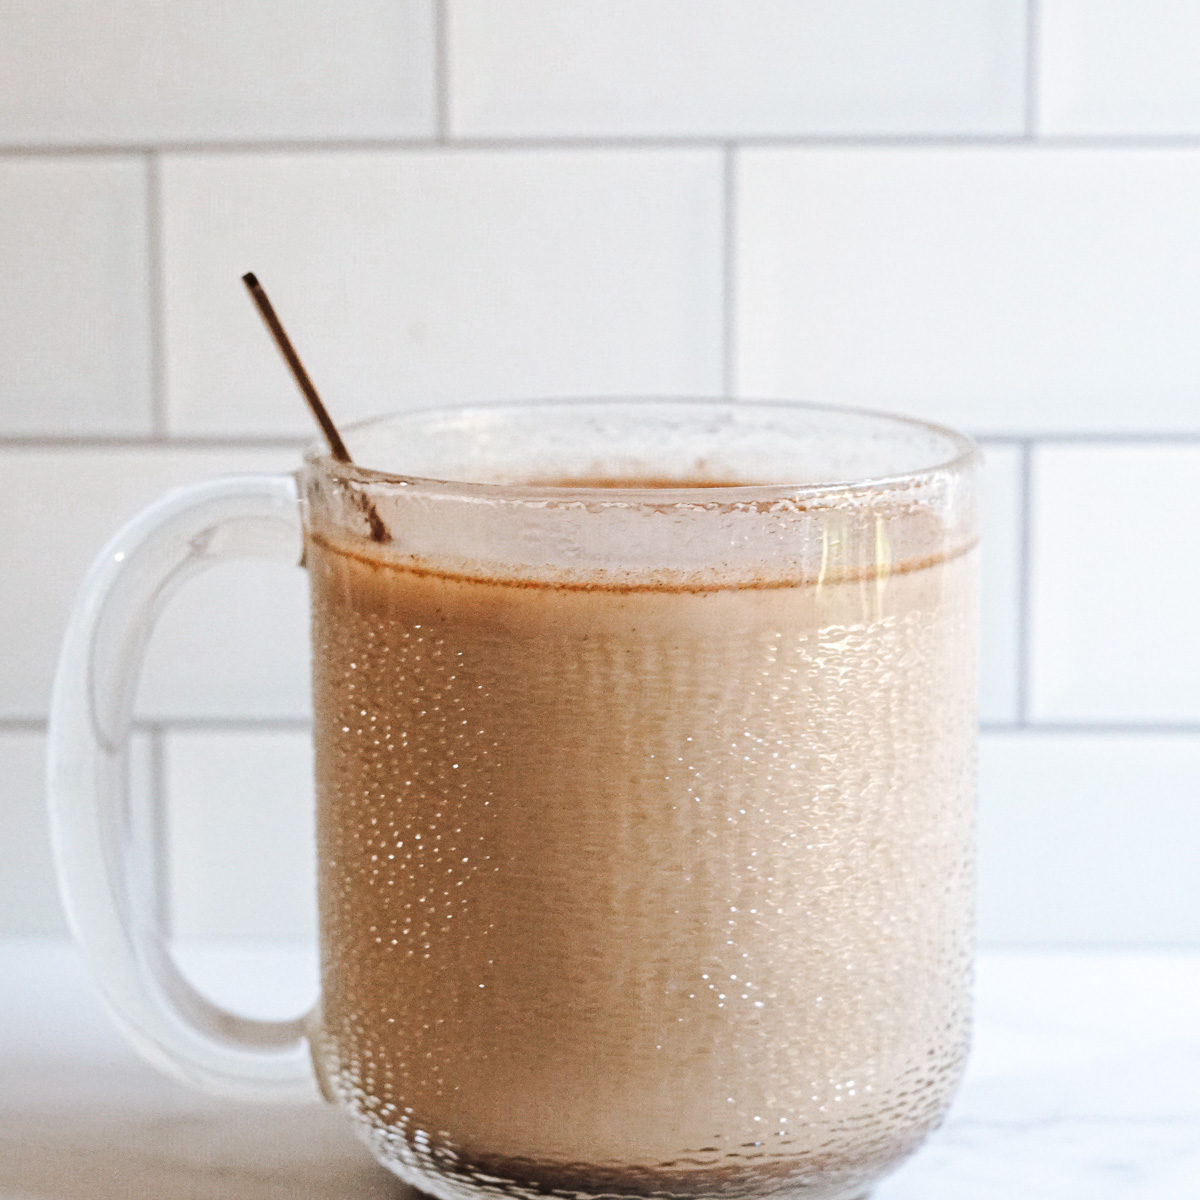 Creamy tan colored coffee drink in clear mug with spoon sticking out of it. Contains coffee, milk and ashwagandha.